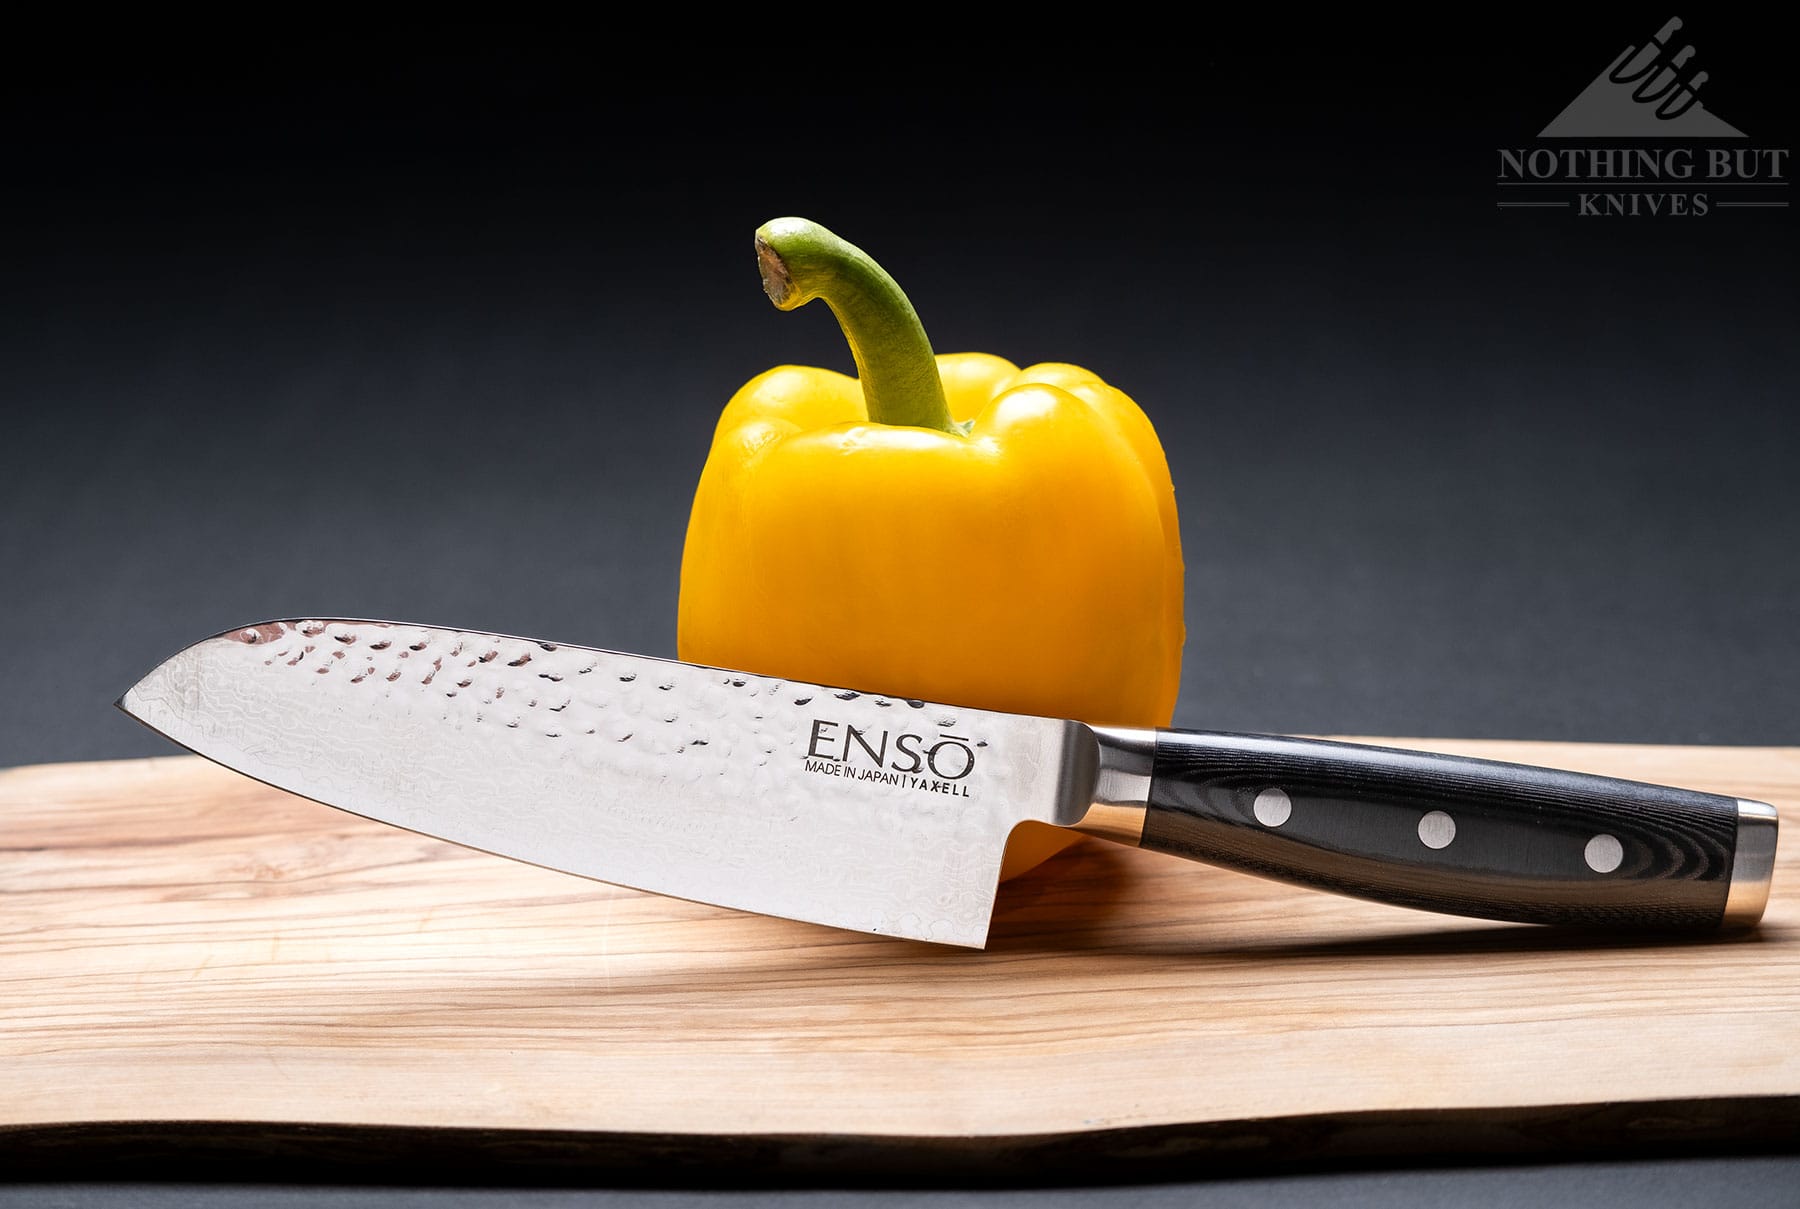 The Enso HD santoku knife leaning against a yellow bell pepper on a wood cutting board.